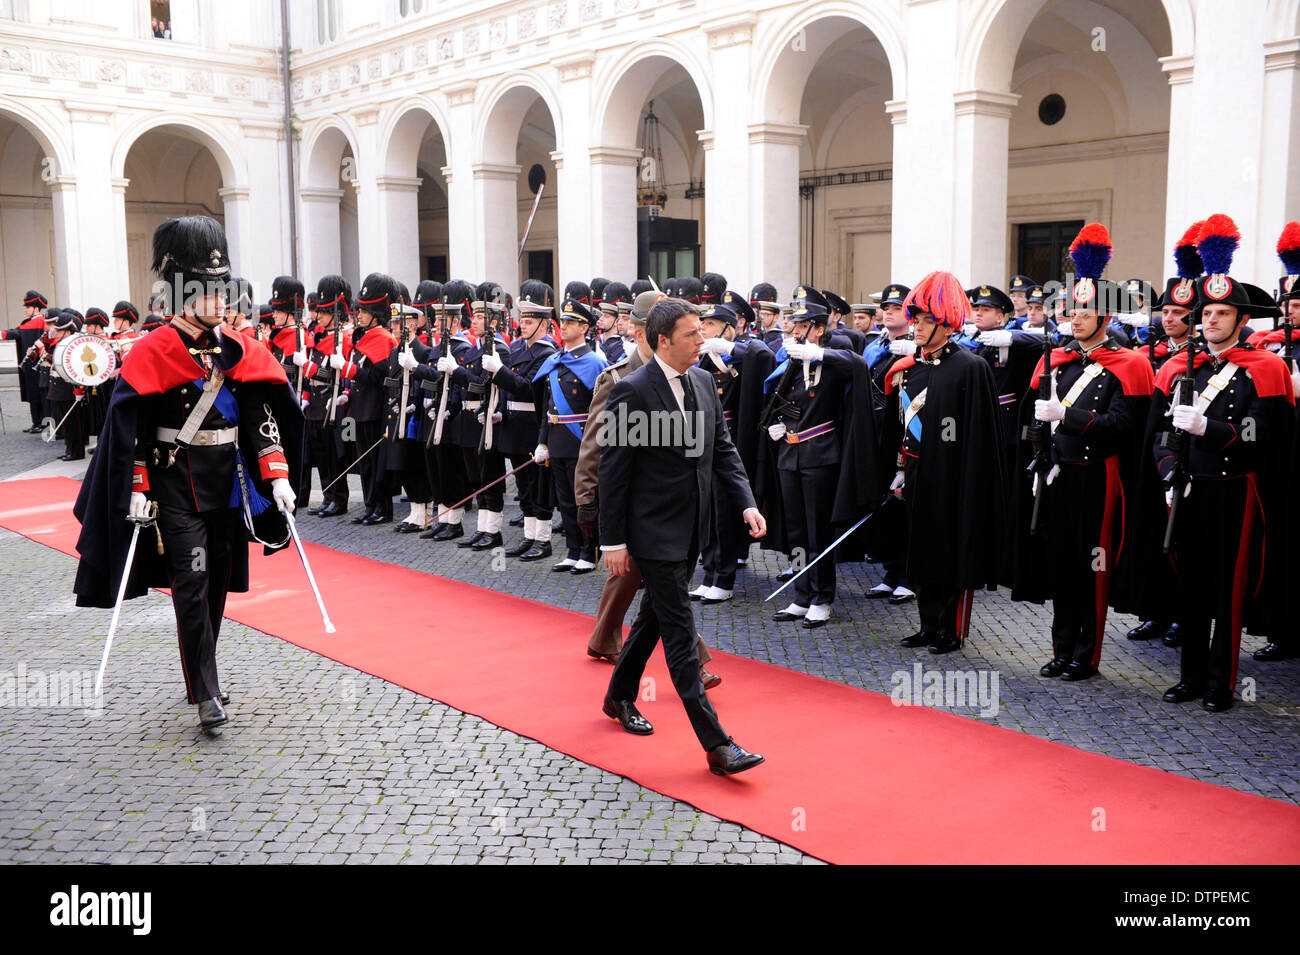 Rome, Italy. 22nd Feb, 2014. Italy'new prime minister Matteo Renzi inspects the guard of honor at the prime minister's office in Rome on February 22, 2014. Italy's new prime minister Matteo Renzi and his cabinet ministers were sworn in on Saturday before Italian President Giorgio Napolitano, starting their task to accelerate reforms and revive the troubled economy. Credit:  Alberto Lingria/Xinhua/Alamy Live News Stock Photo